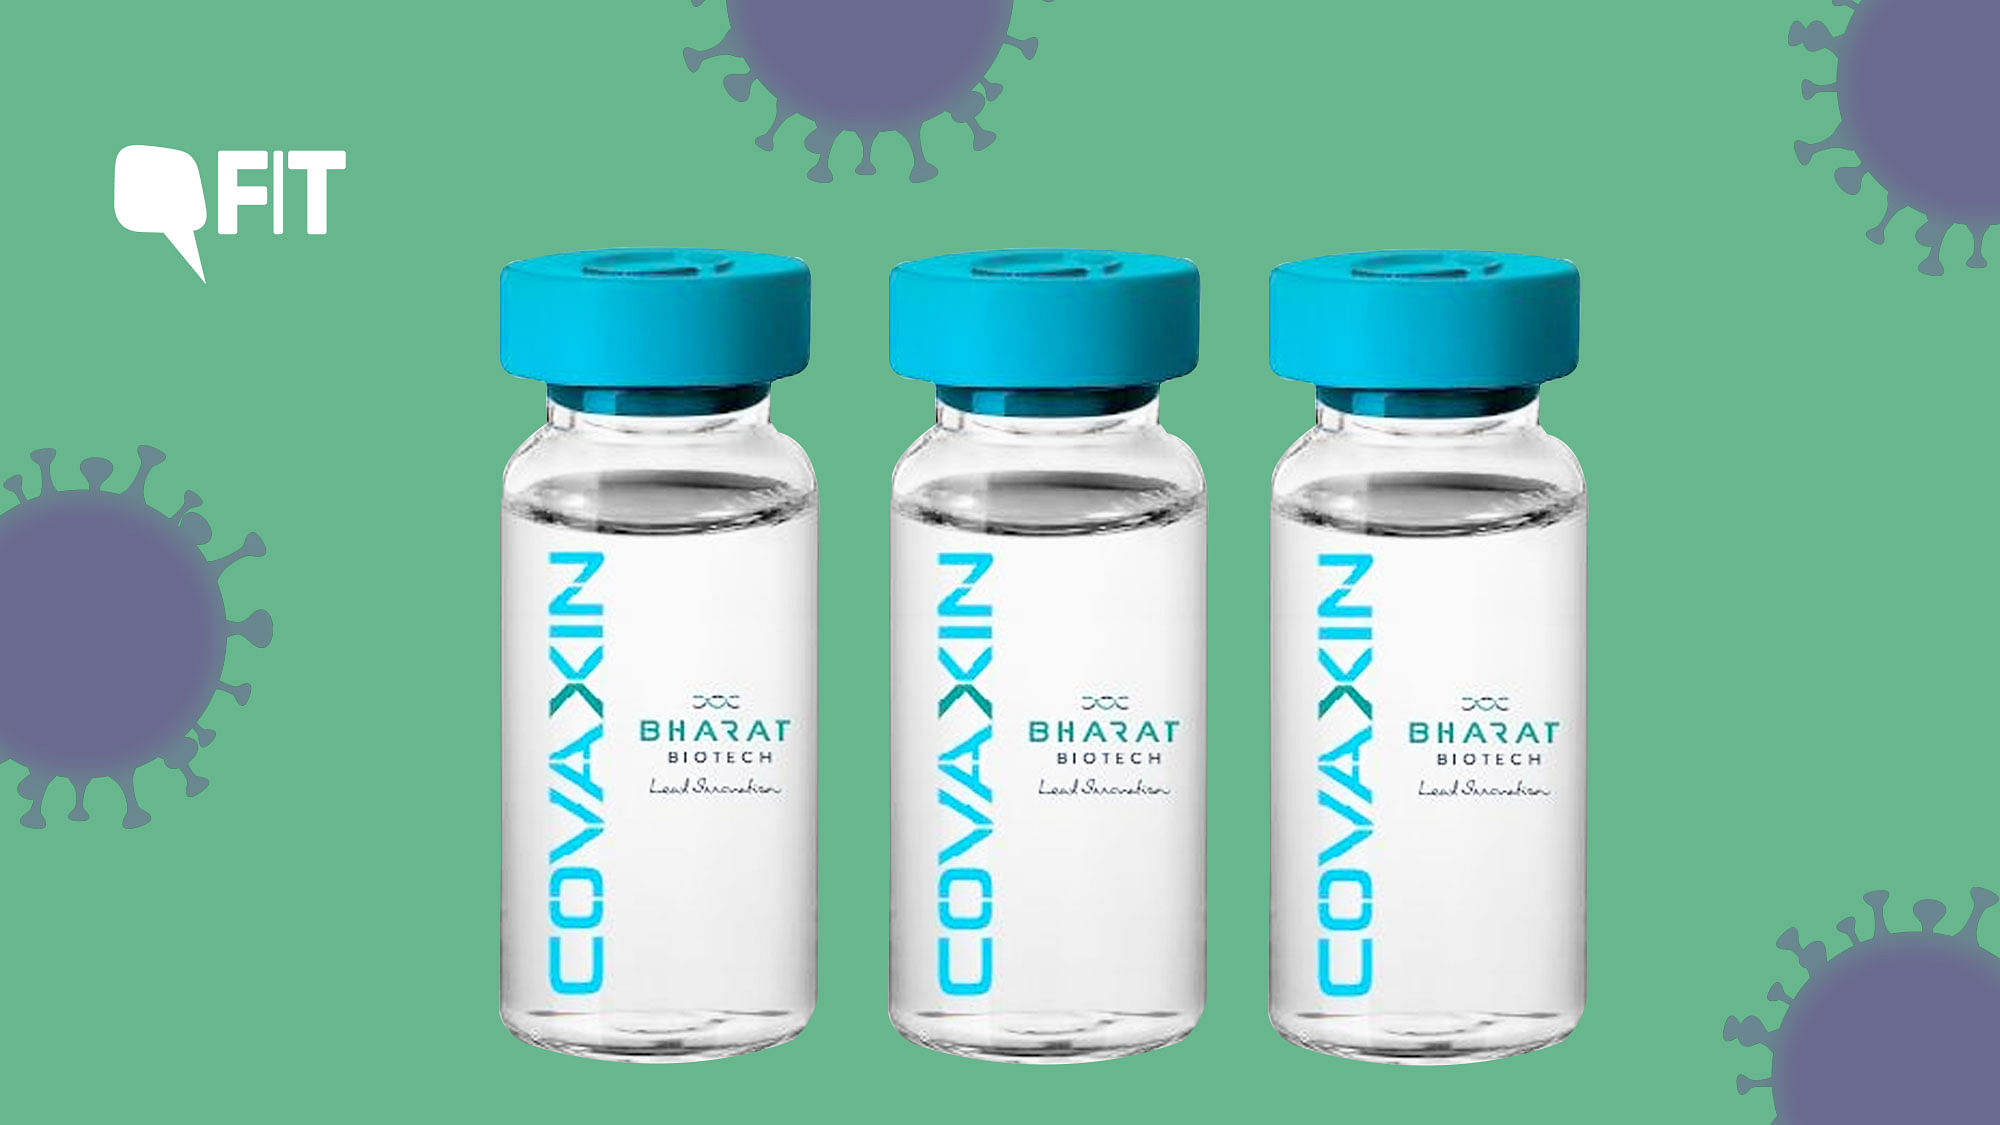 Bharat Biotech, the company which is developing one of India’s indigenous vaccine candidates called Covaxin, expects that the shot will be ready by June 2021.